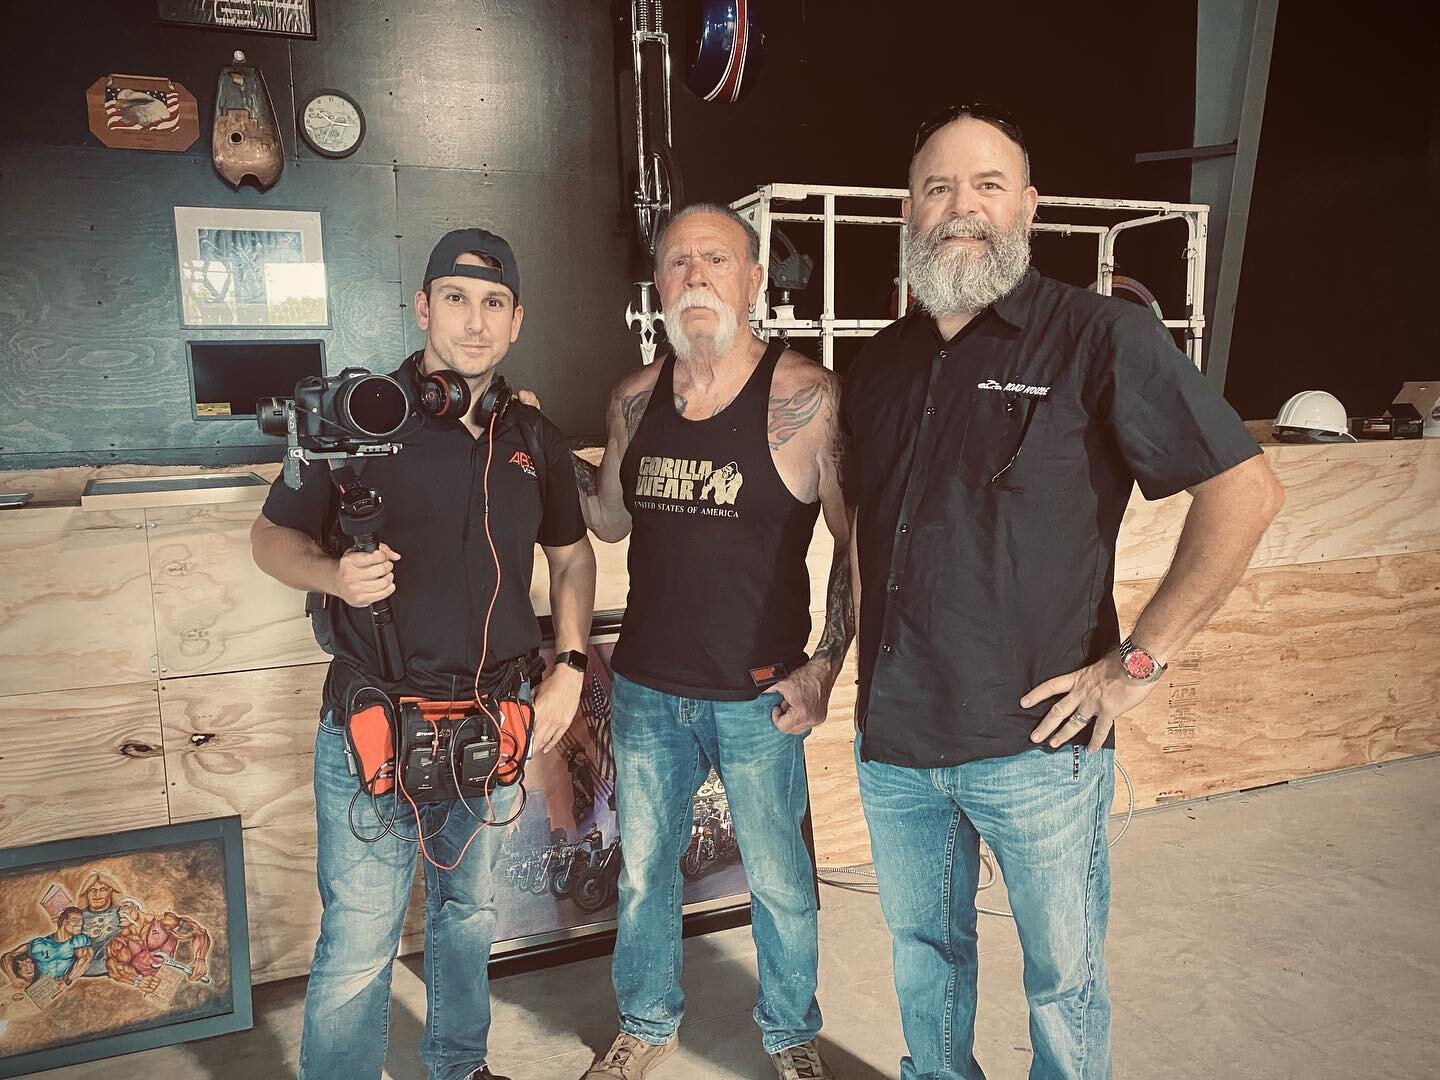 This place is going to be awesome! Hung out with these guys unloading Paul&rsquo;s memorabilia from the last few decades.
@occroadhouse @__iamserfustini @paulteutulsr 
.
.
.
.
.
.
.
#occ #occroadhouse #restaurant #construction #hardhat #biker #motorc